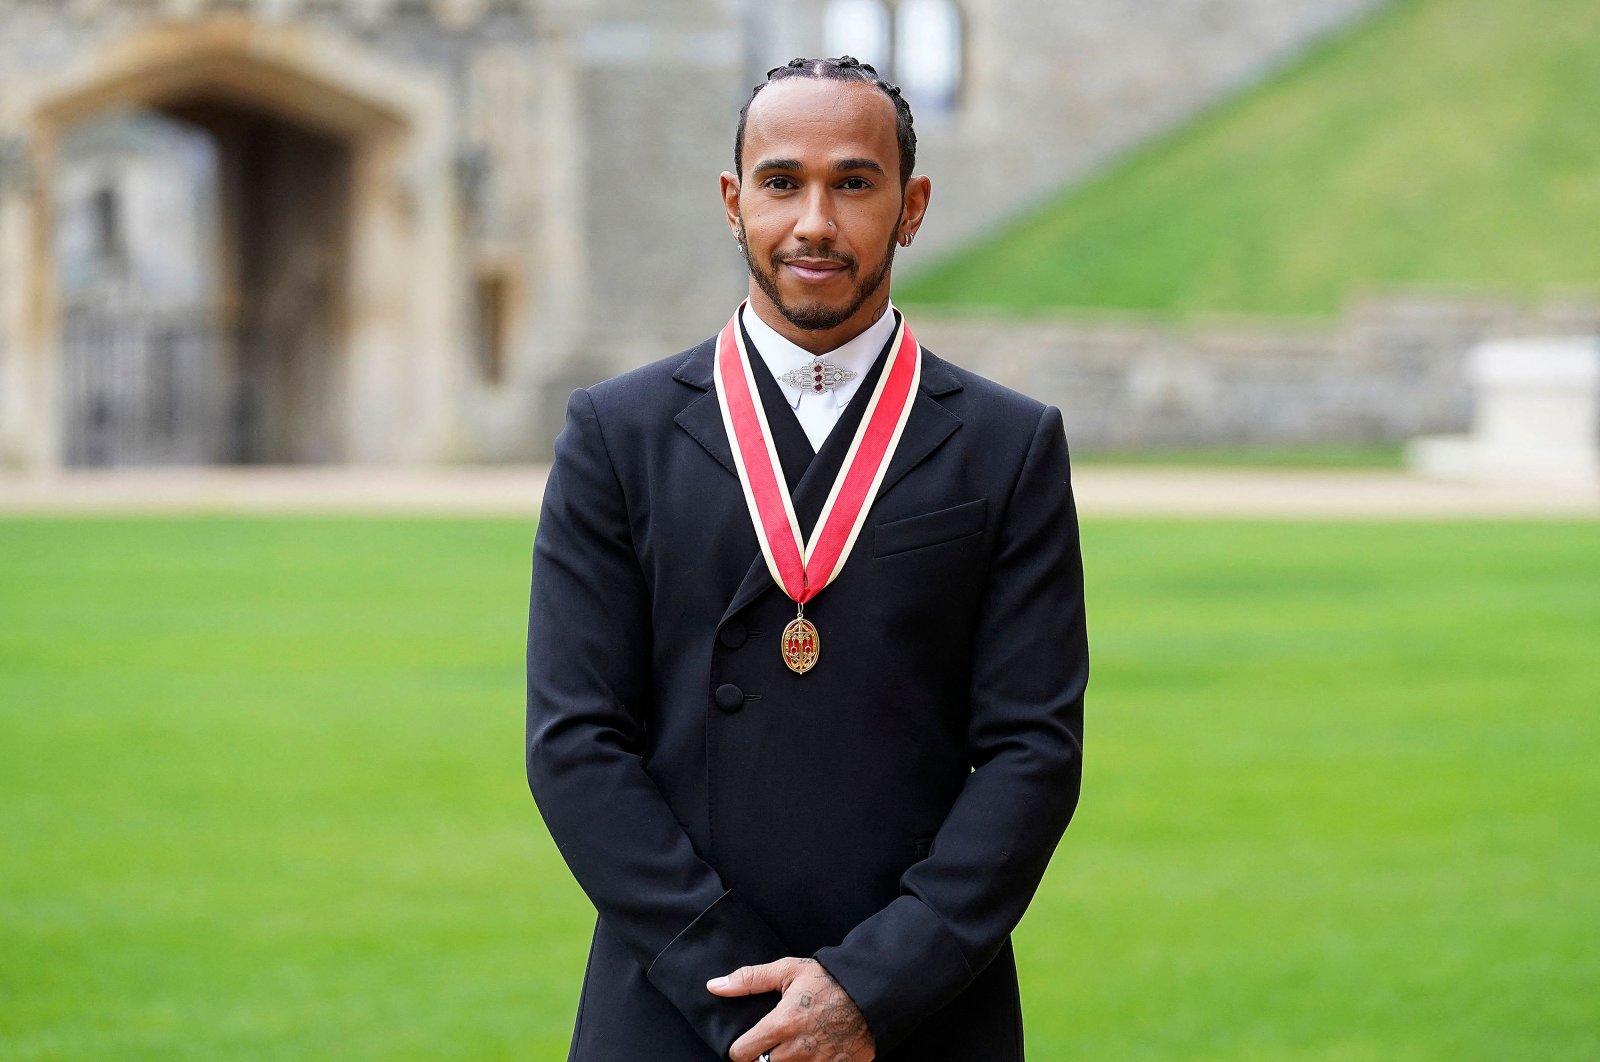 Mercedes&#039; British F1 driver Lewis Hamilton poses with his medal after being appointed as a Knight Bachelor (Knighthood) for services to motorsports, by Britain&#039;s Prince Charles, Prince of Wales, during an investiture ceremony at Windsor Castle in Windsor, west of London, Dec. 15, 2021. (AFP Photo)